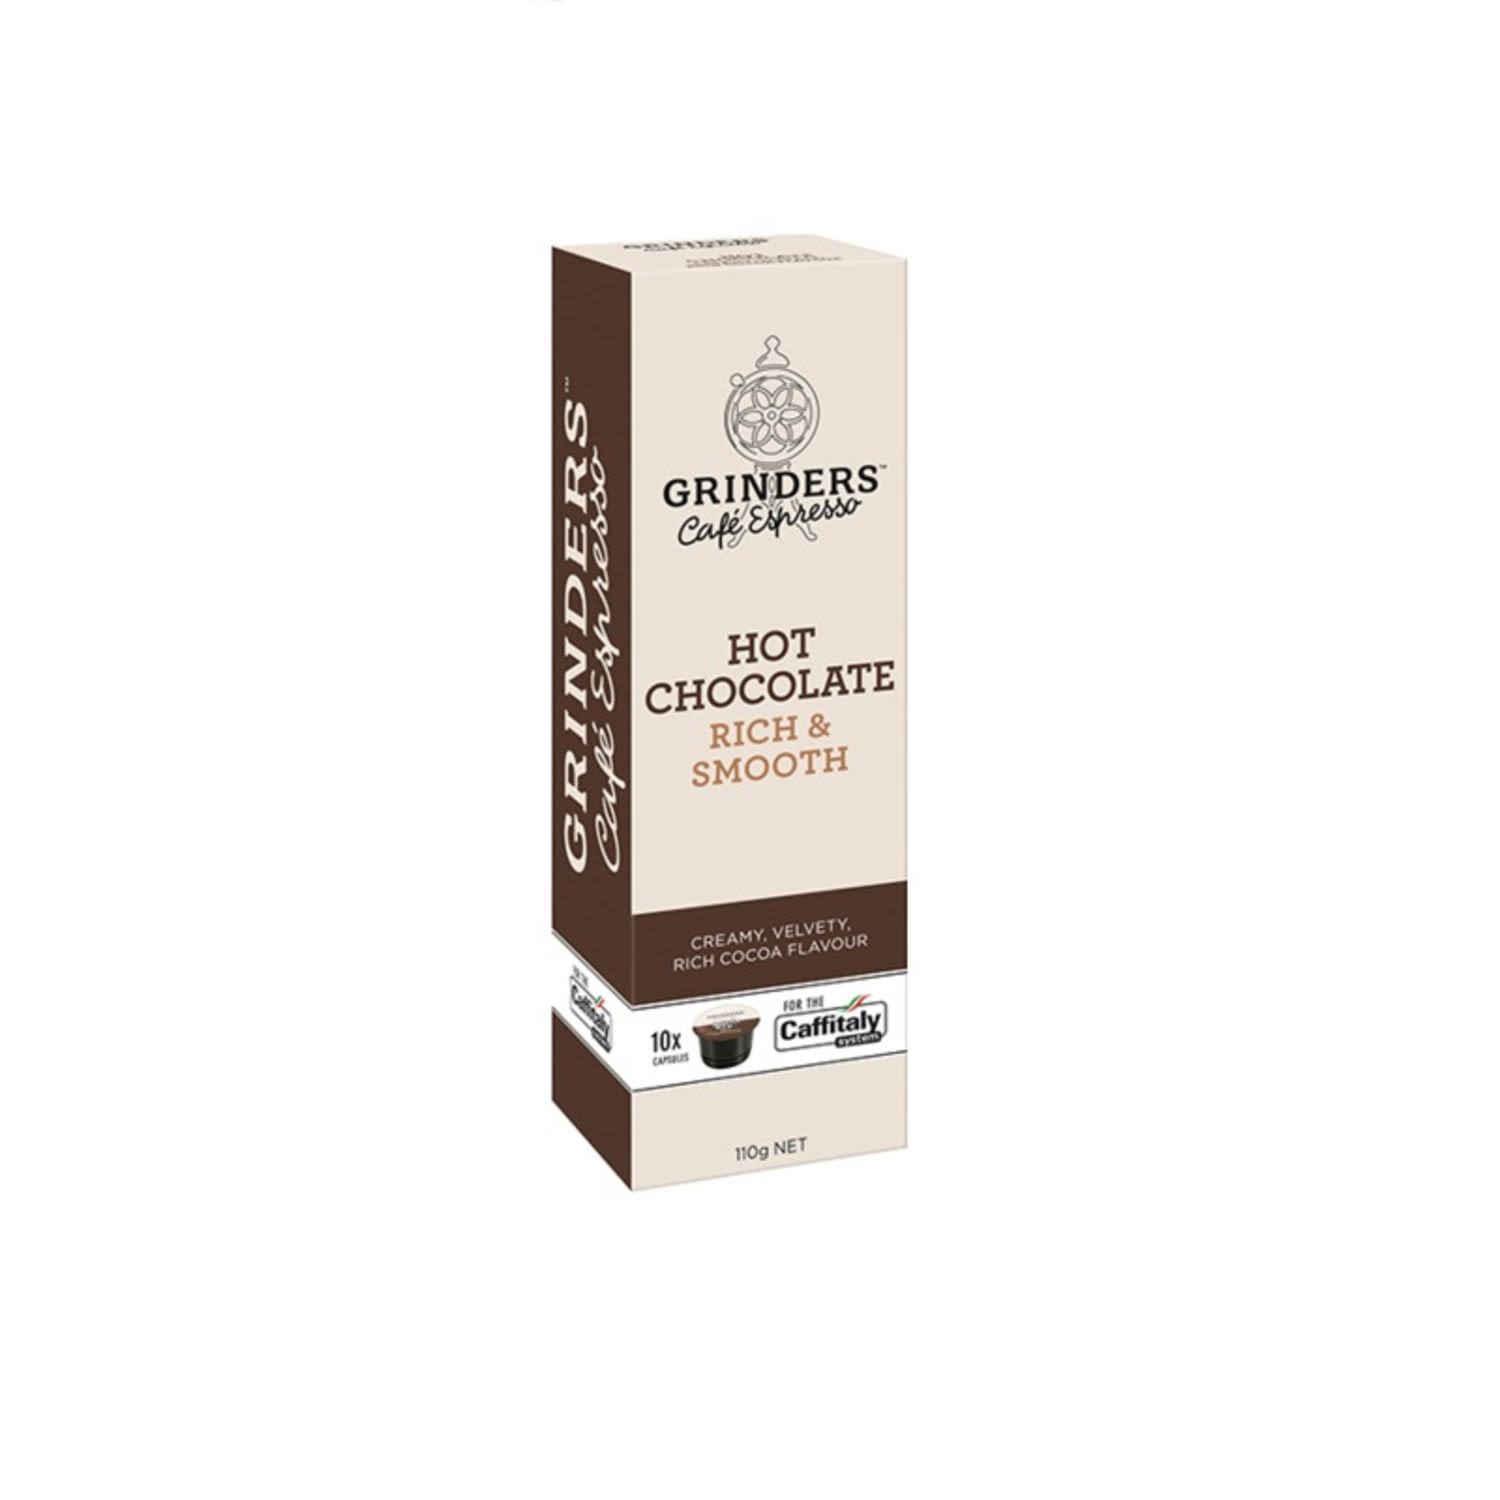 Grinders Hot Chocolate Rich & Smooth Capsules, 10 Each